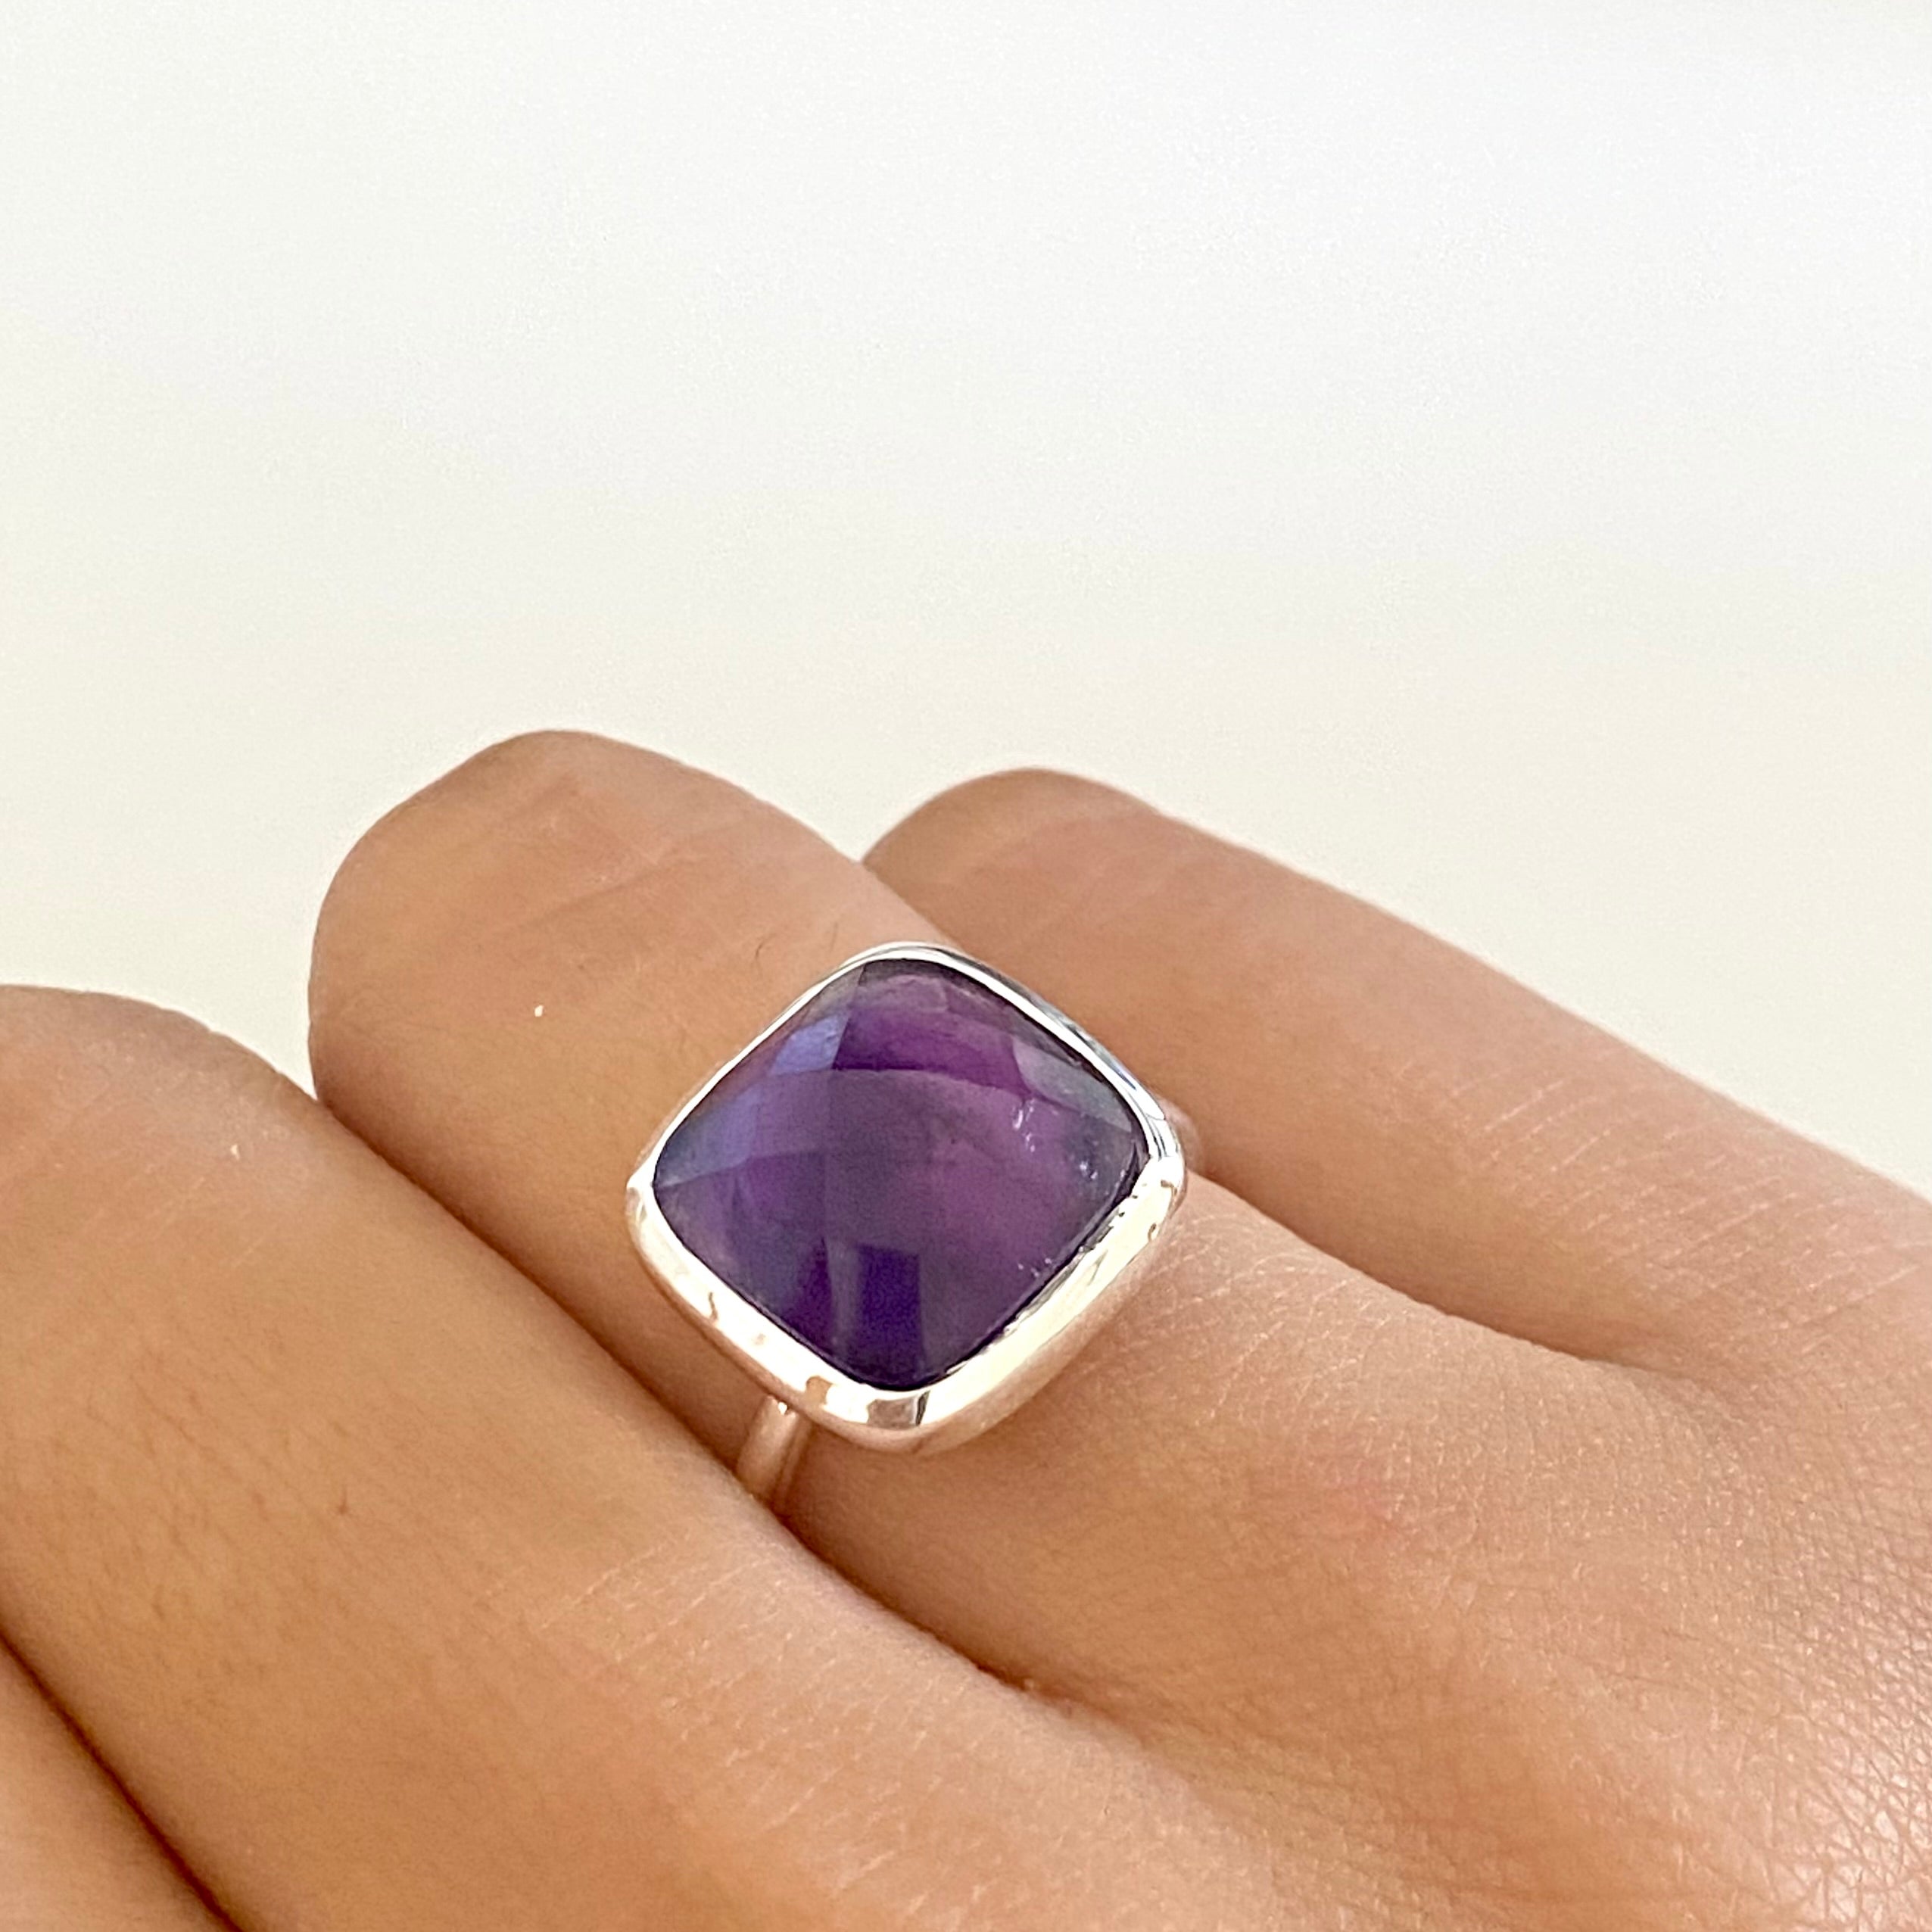 Silver Ring with Square Semiprecious Stone - Amethyst